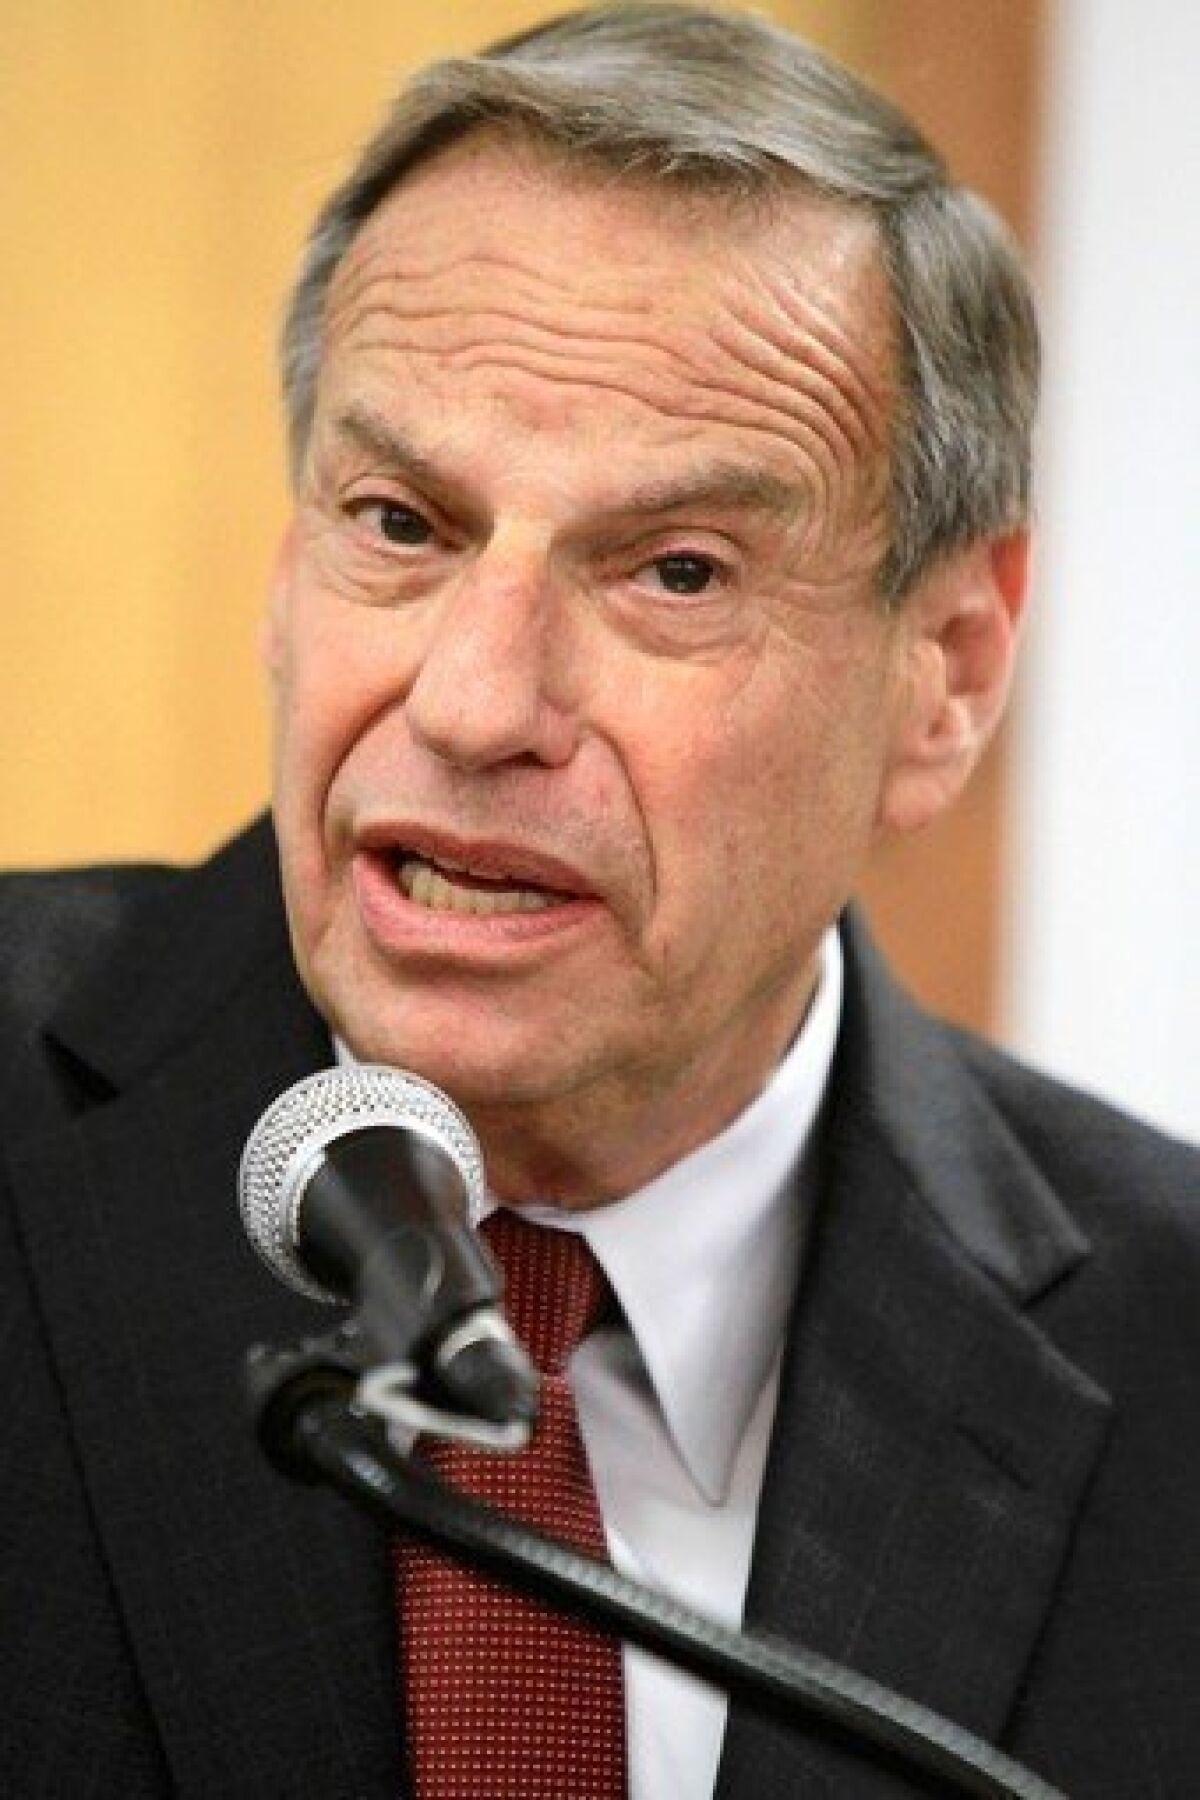 San Diego Mayor Bob Filner won't get his legal bills paid by the city in the sexual harassment lawsuit against him.